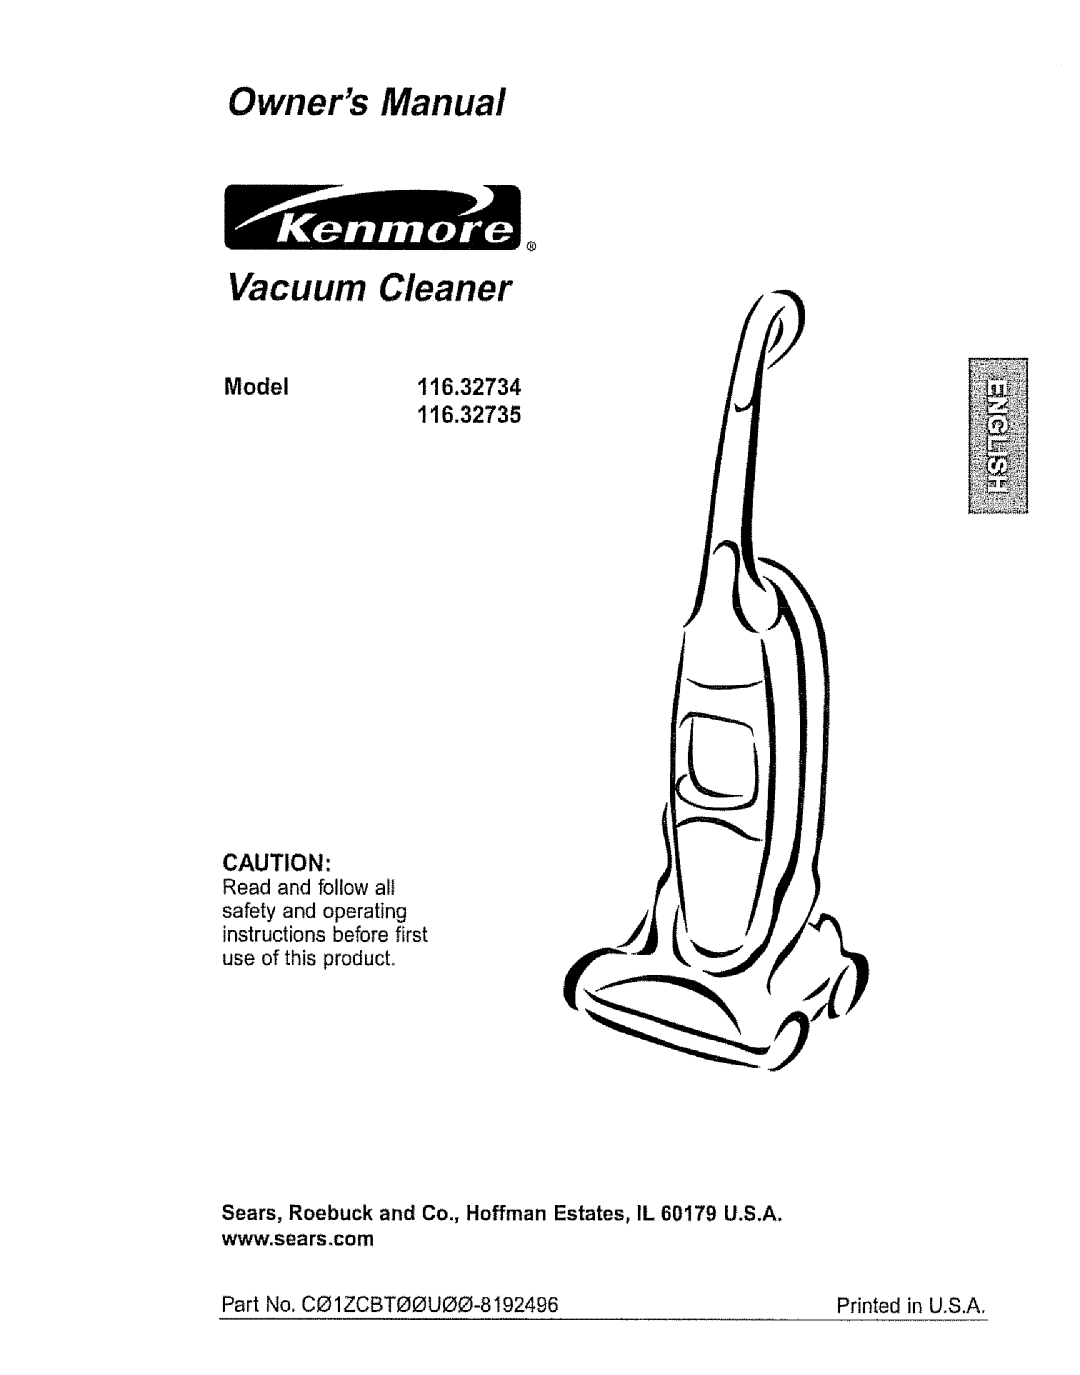 Kenmore 116.32735 owner manual Model116.32734, safety and operating instructions before first, Vacuum Cleaner 